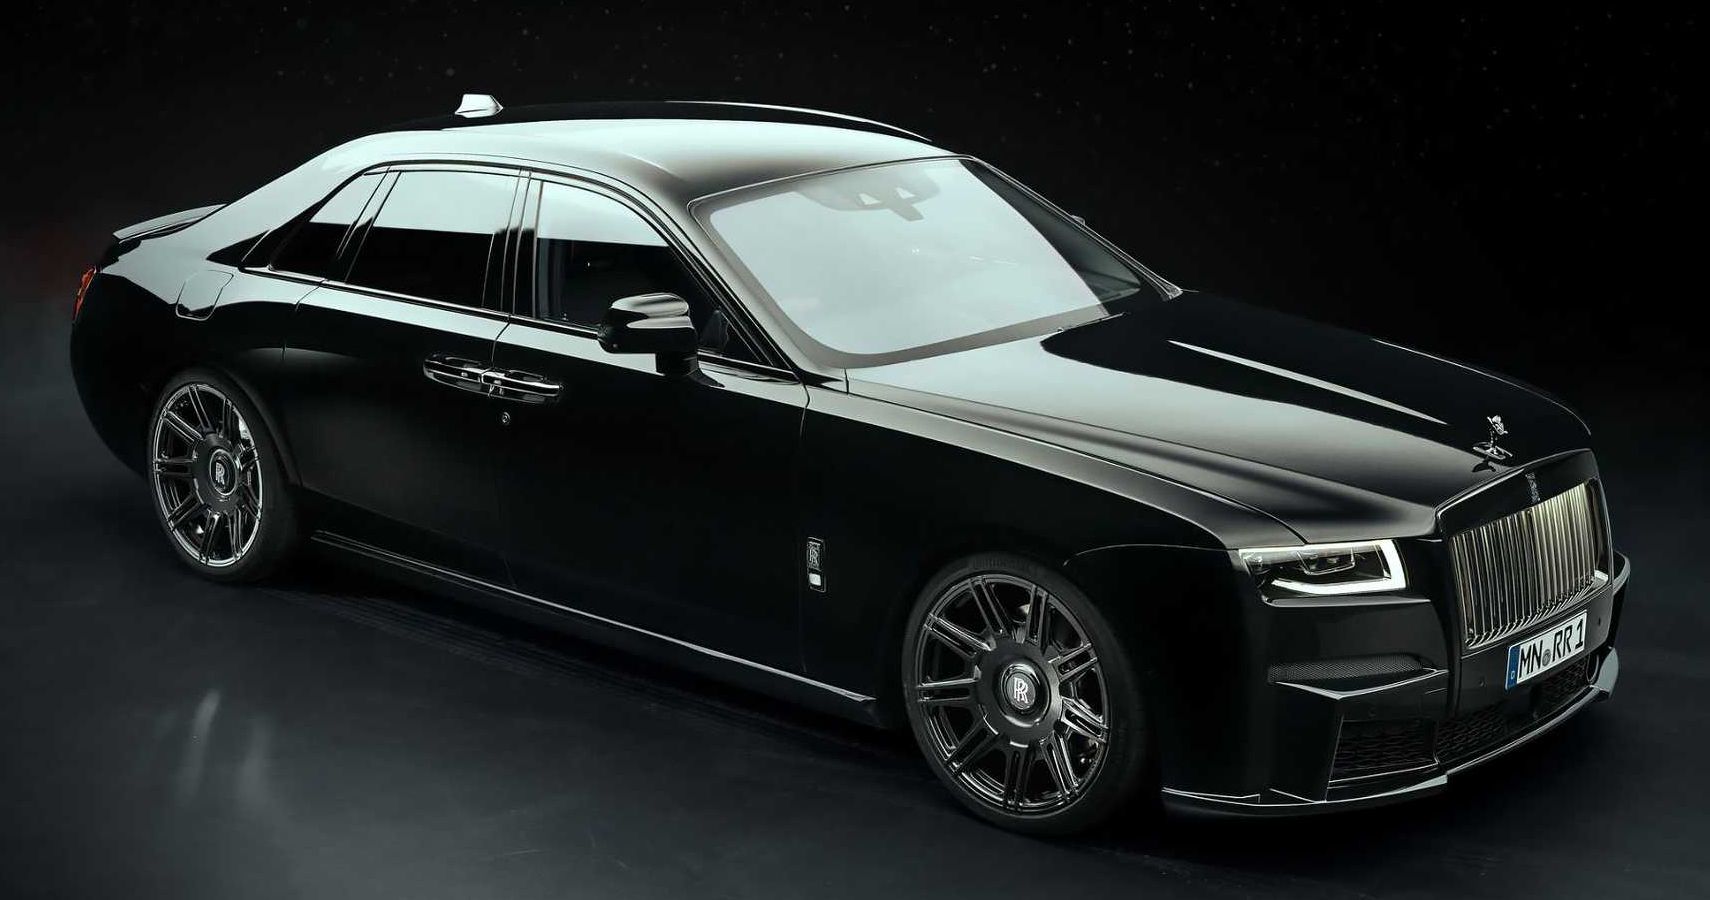 This Rolls-Royce Black Badge Ghost by Spofec is as Sinister as it is Fast